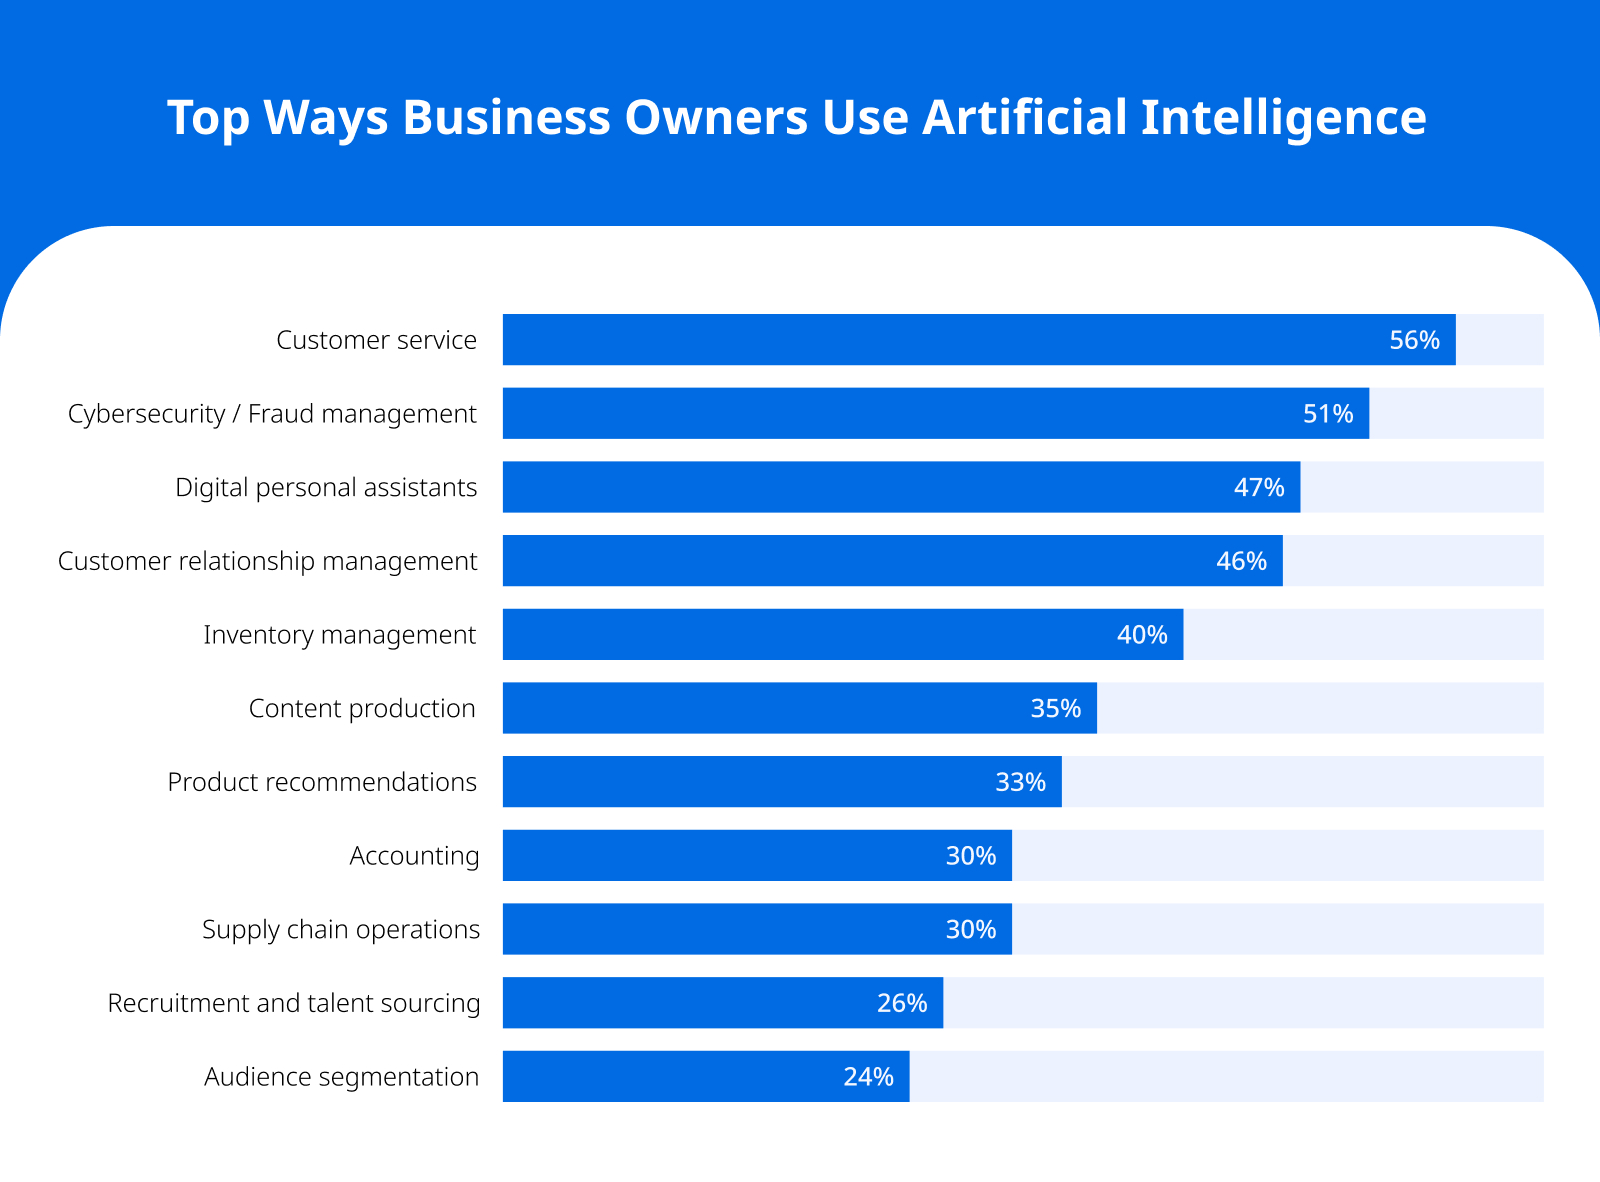 Top Ways Business Owners Use Artificial Intelligence